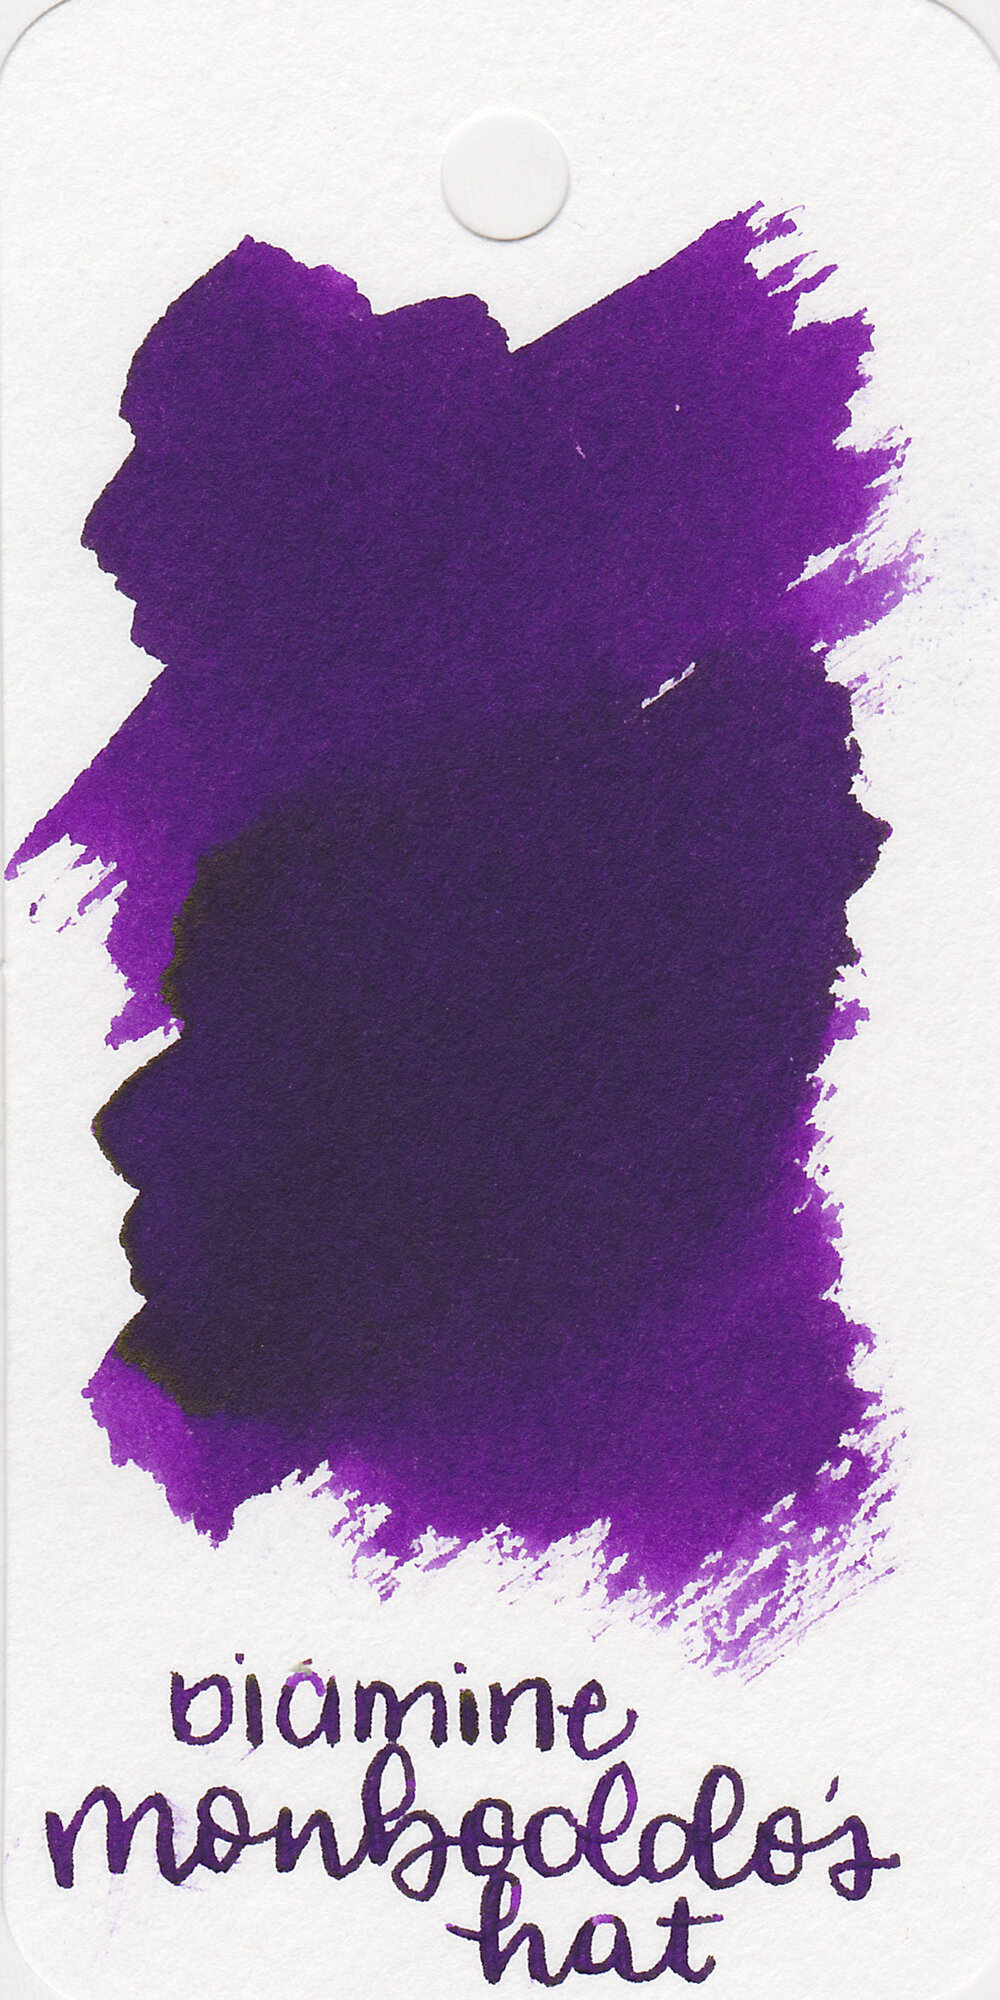 Ink Review #985: Diamine Monboddo's Hat — Mountain of Ink